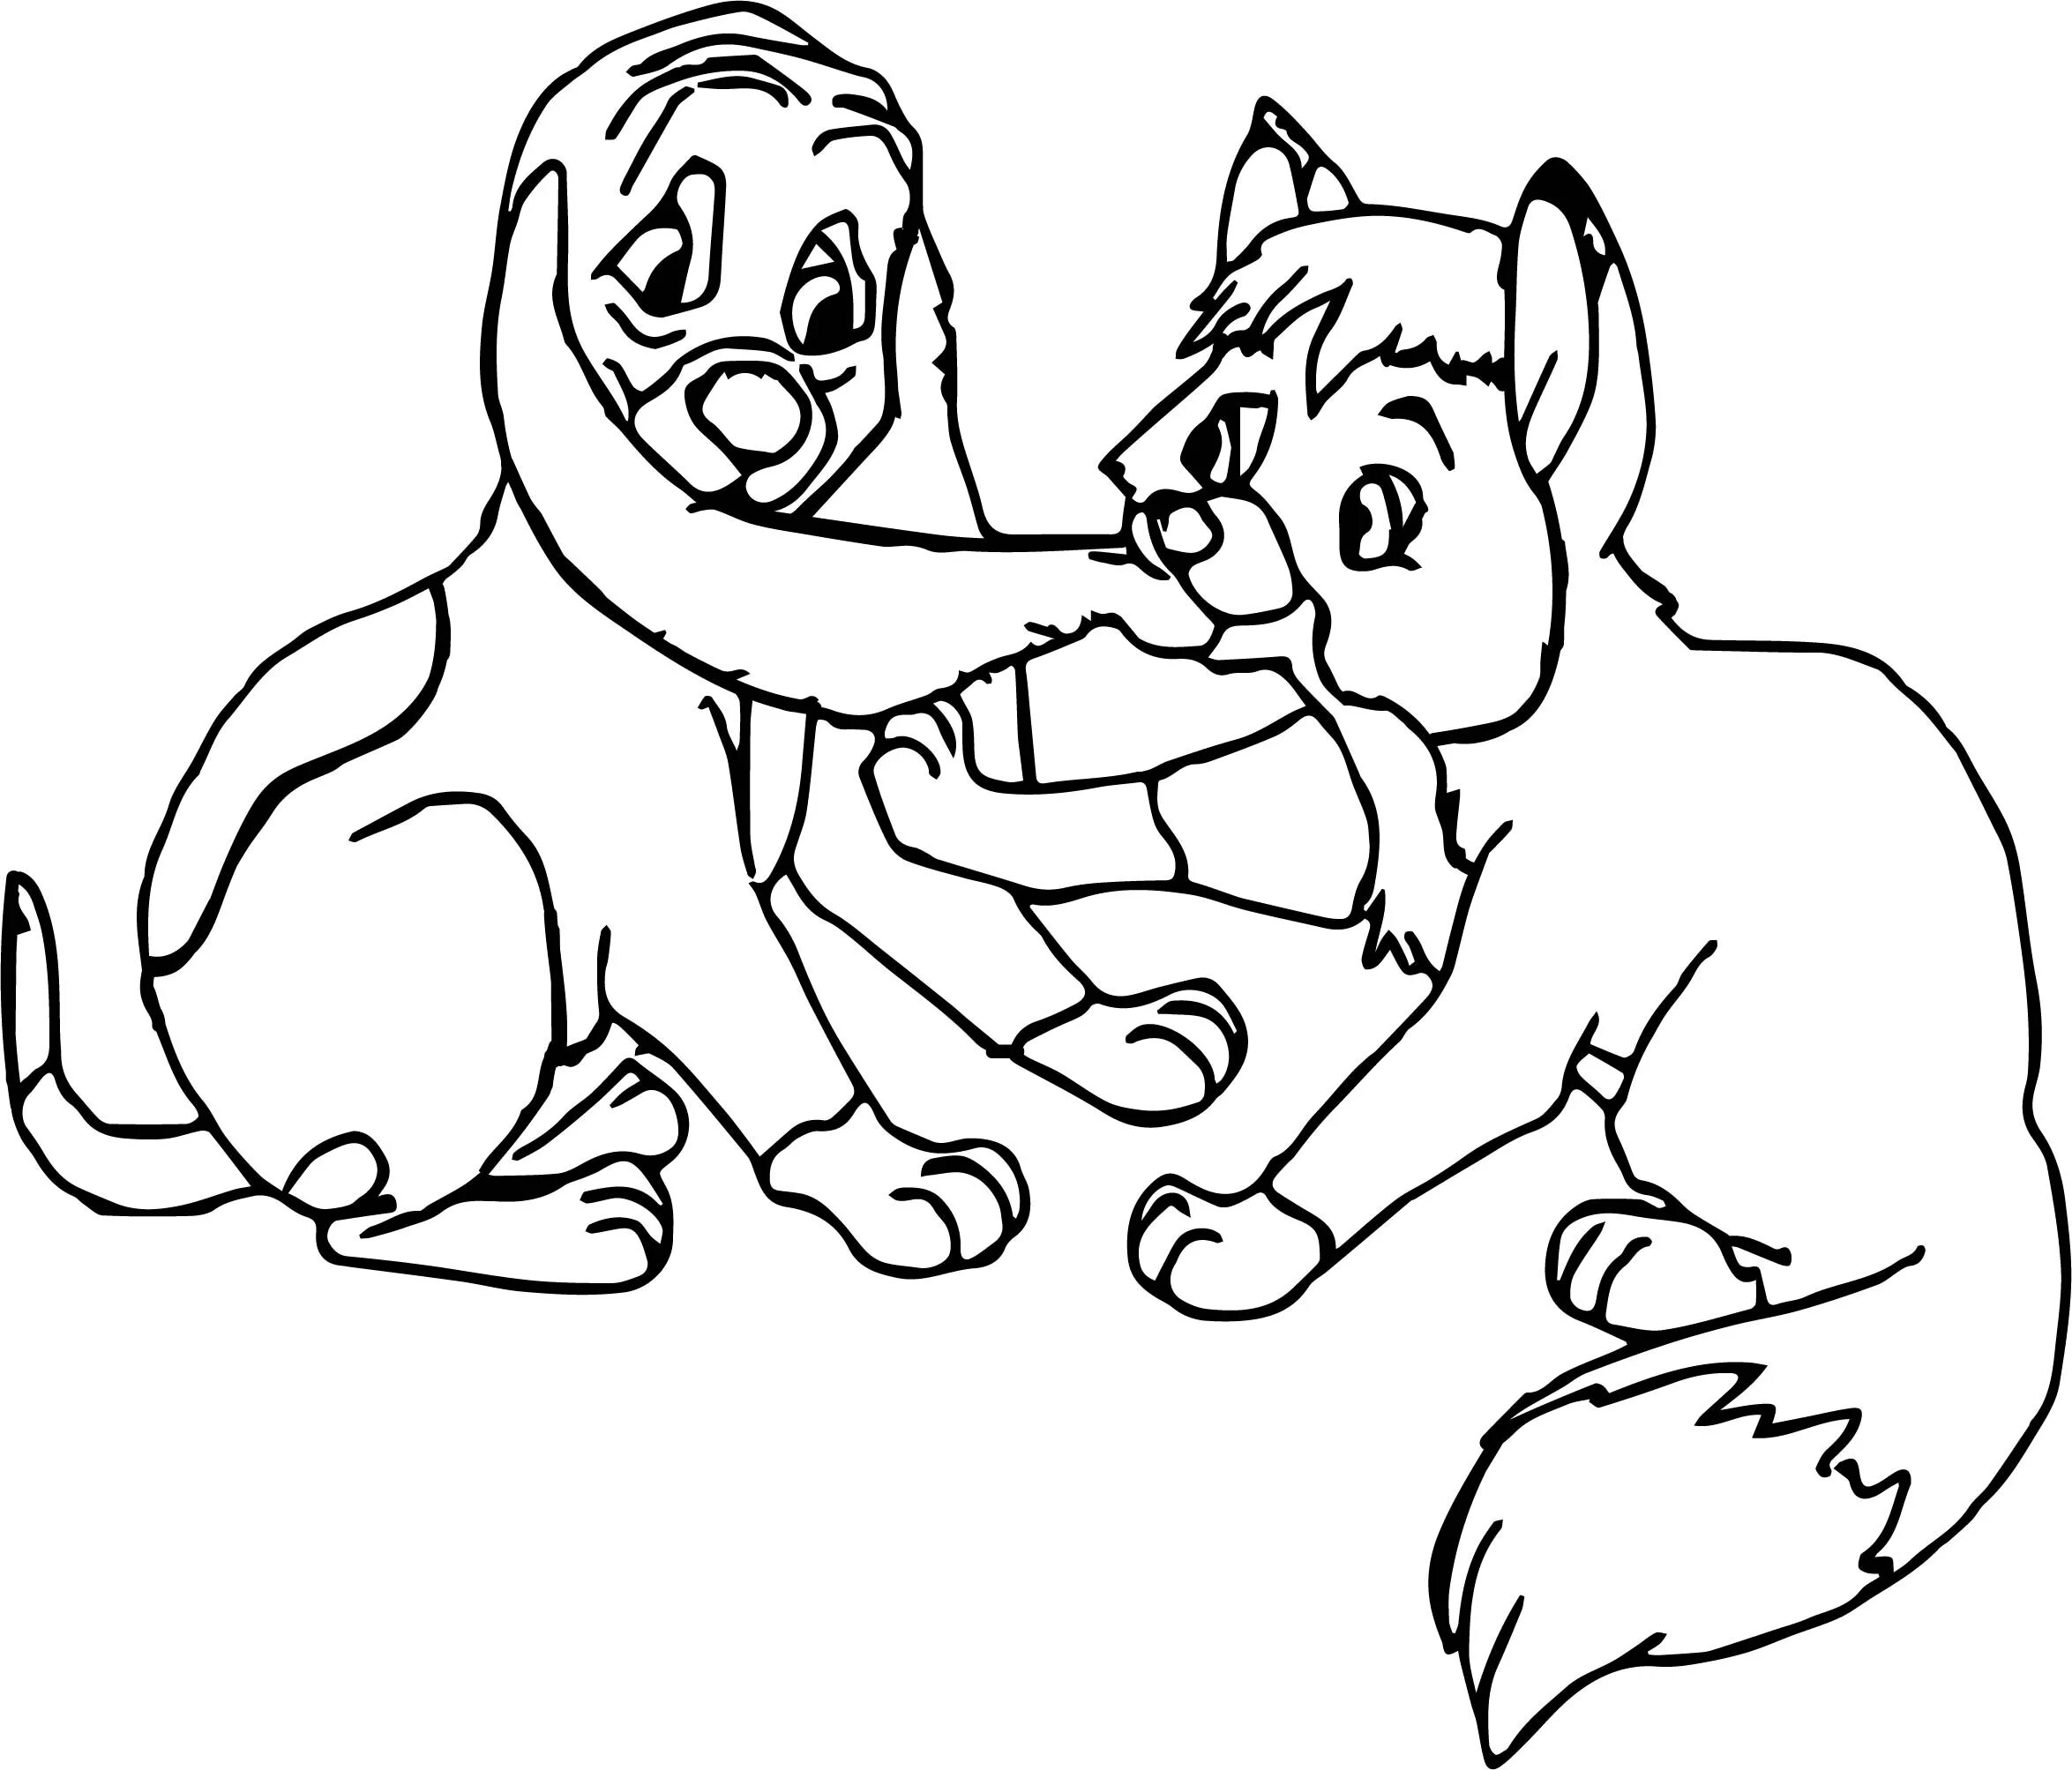 Shiny fox and dog coloring book